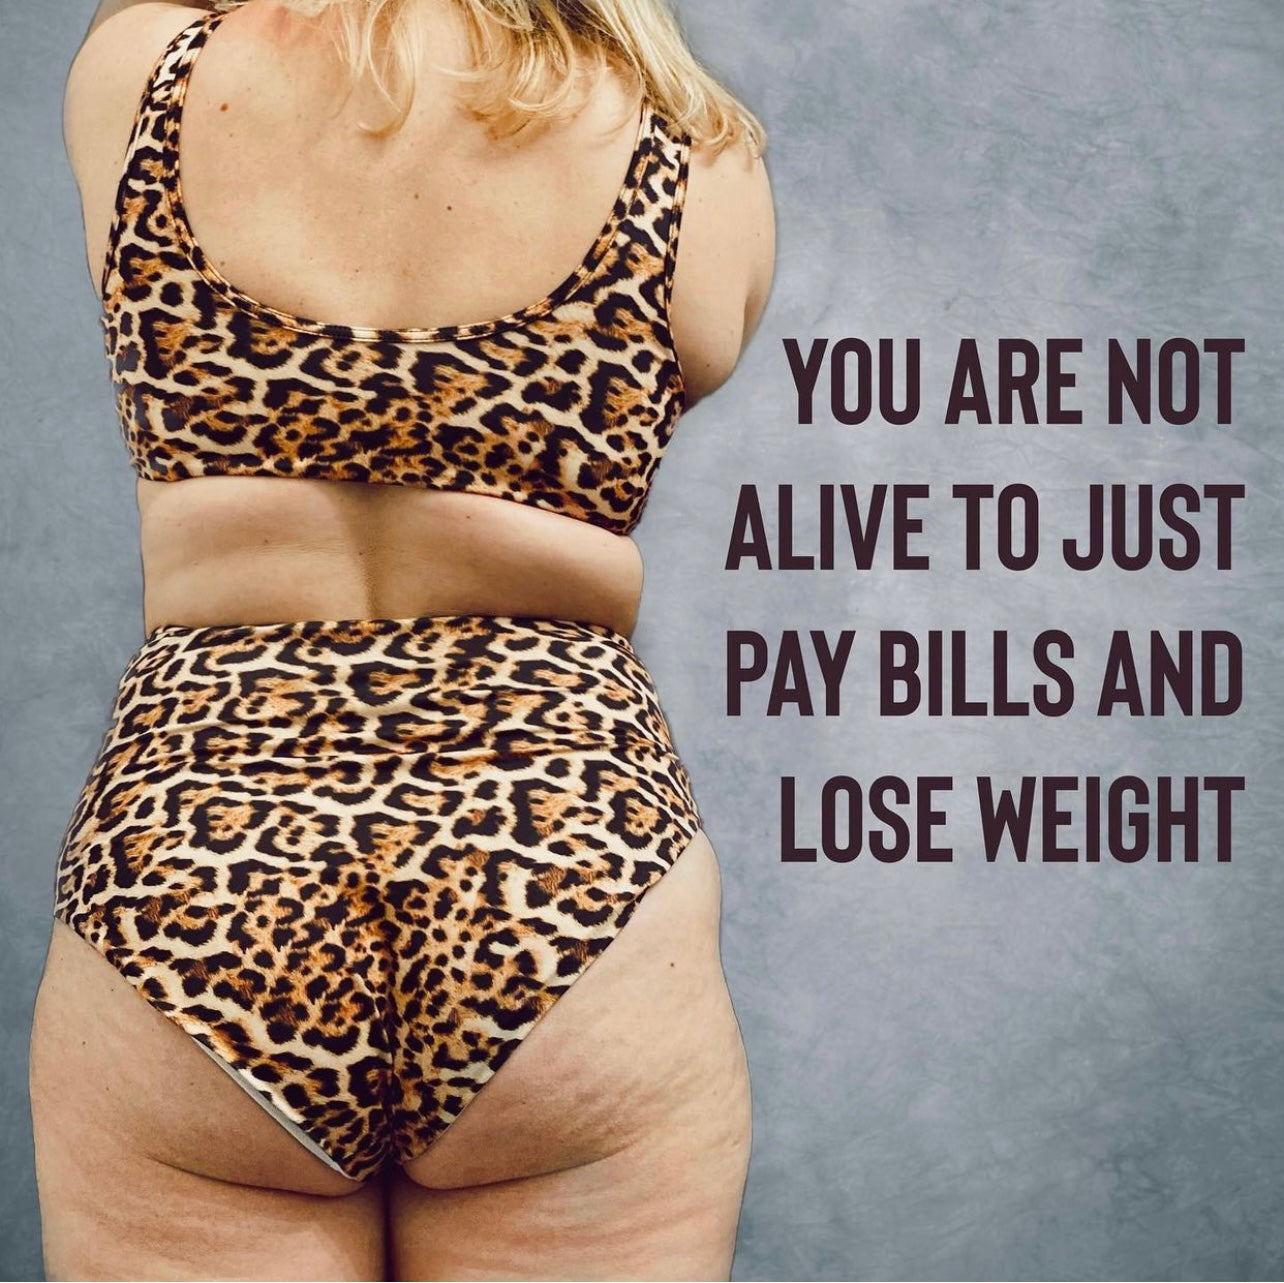 Losing weight is not your sole purpose in life!